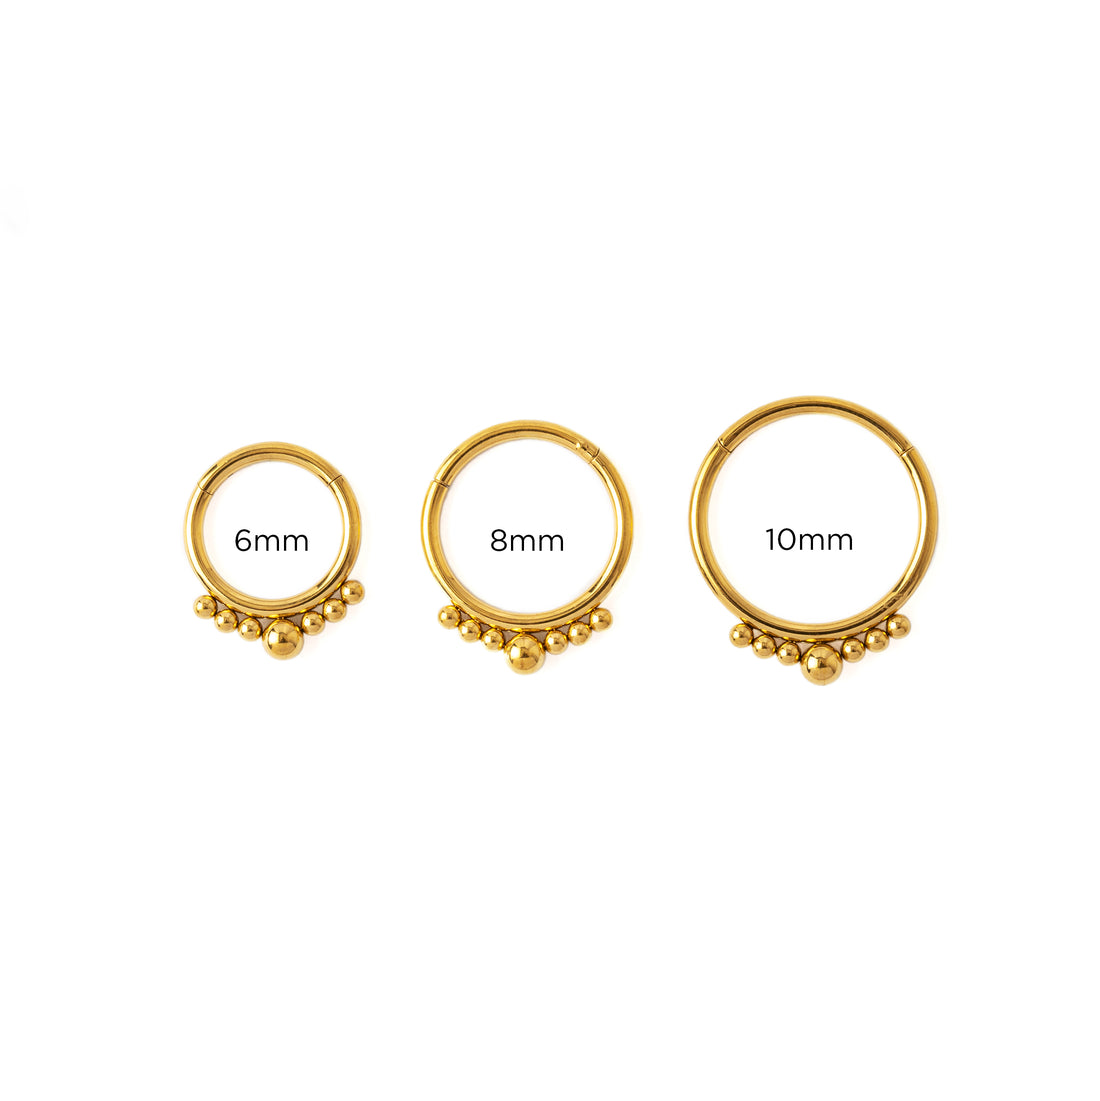 6mm, 8mm, 10mm Golden Marjani Septum Clickers frontal view